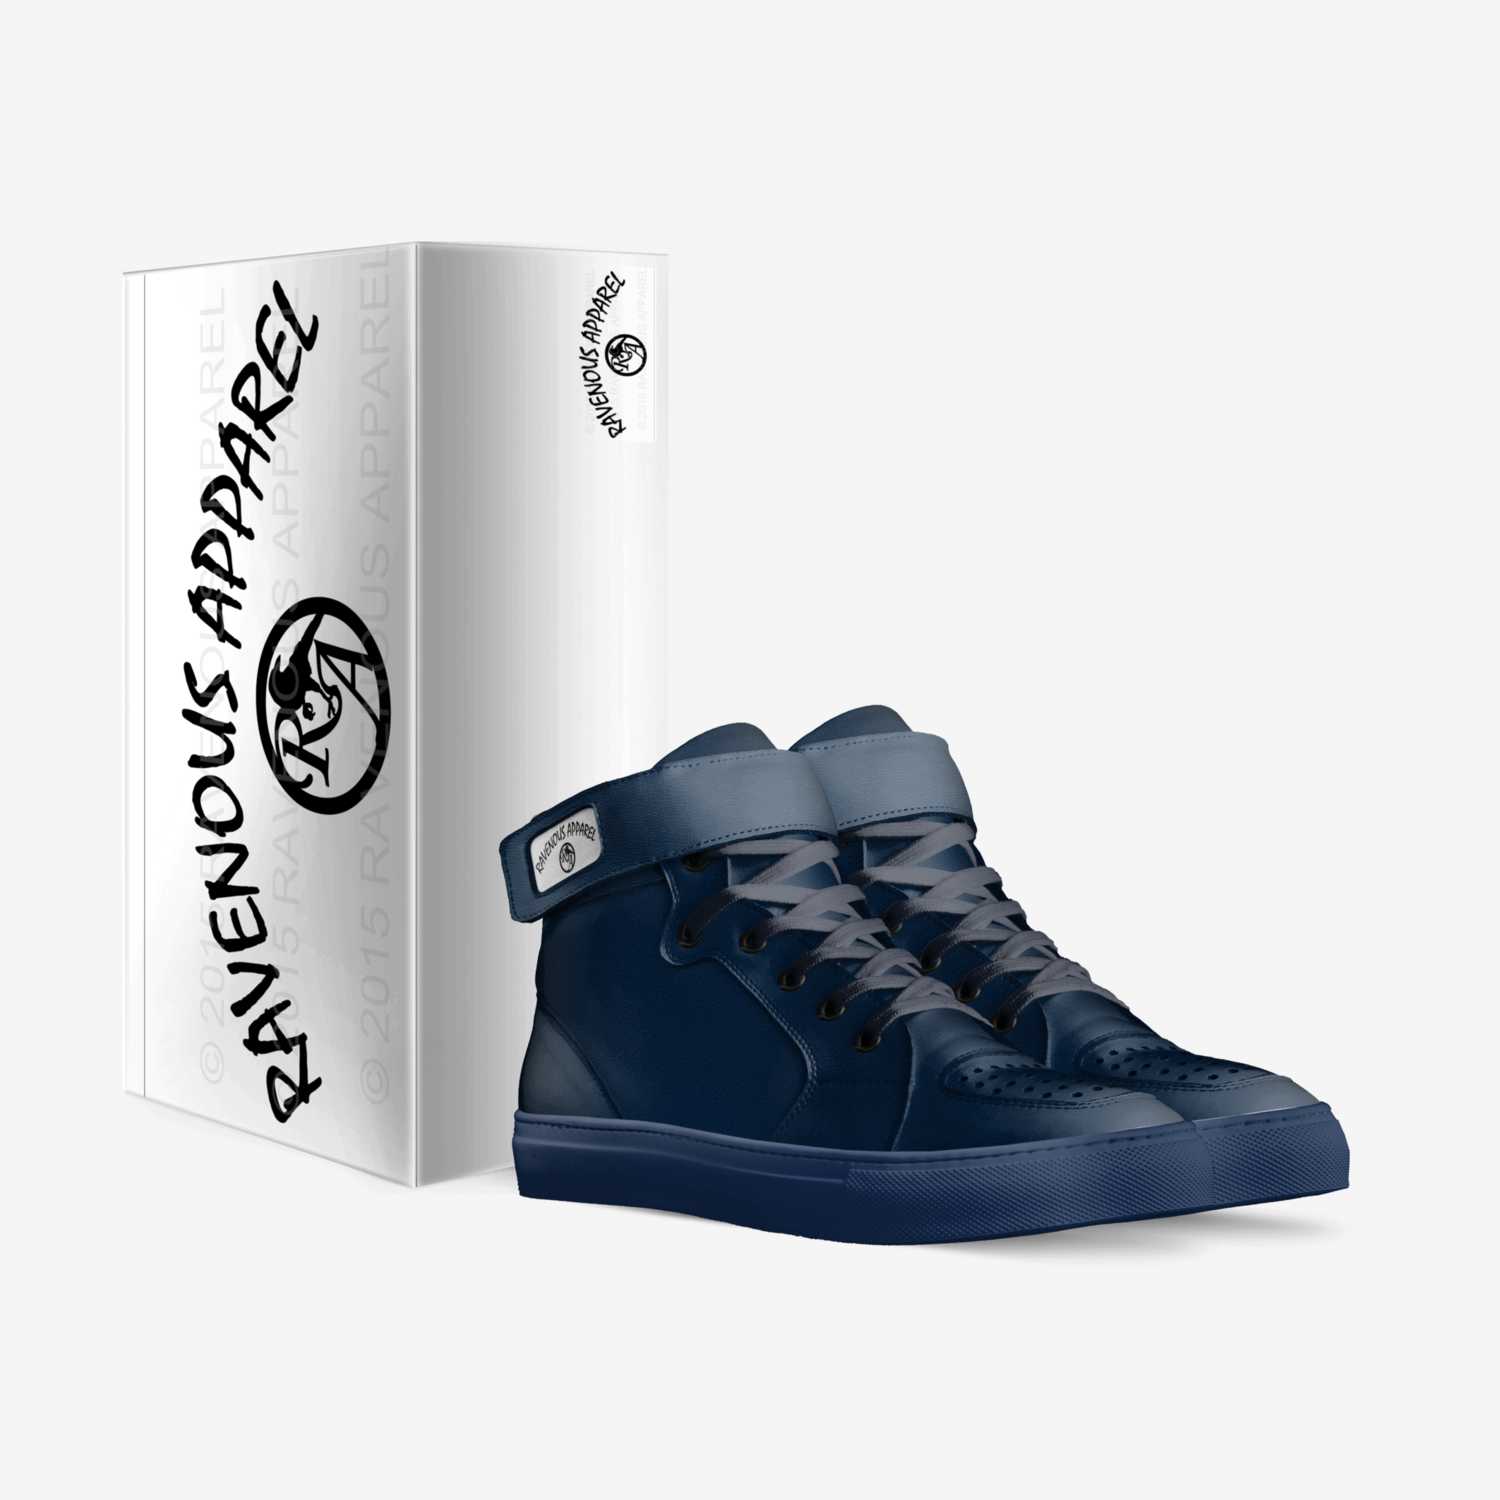 RaveNavy custom made in Italy shoes by Thomas Rodriguez | Box view